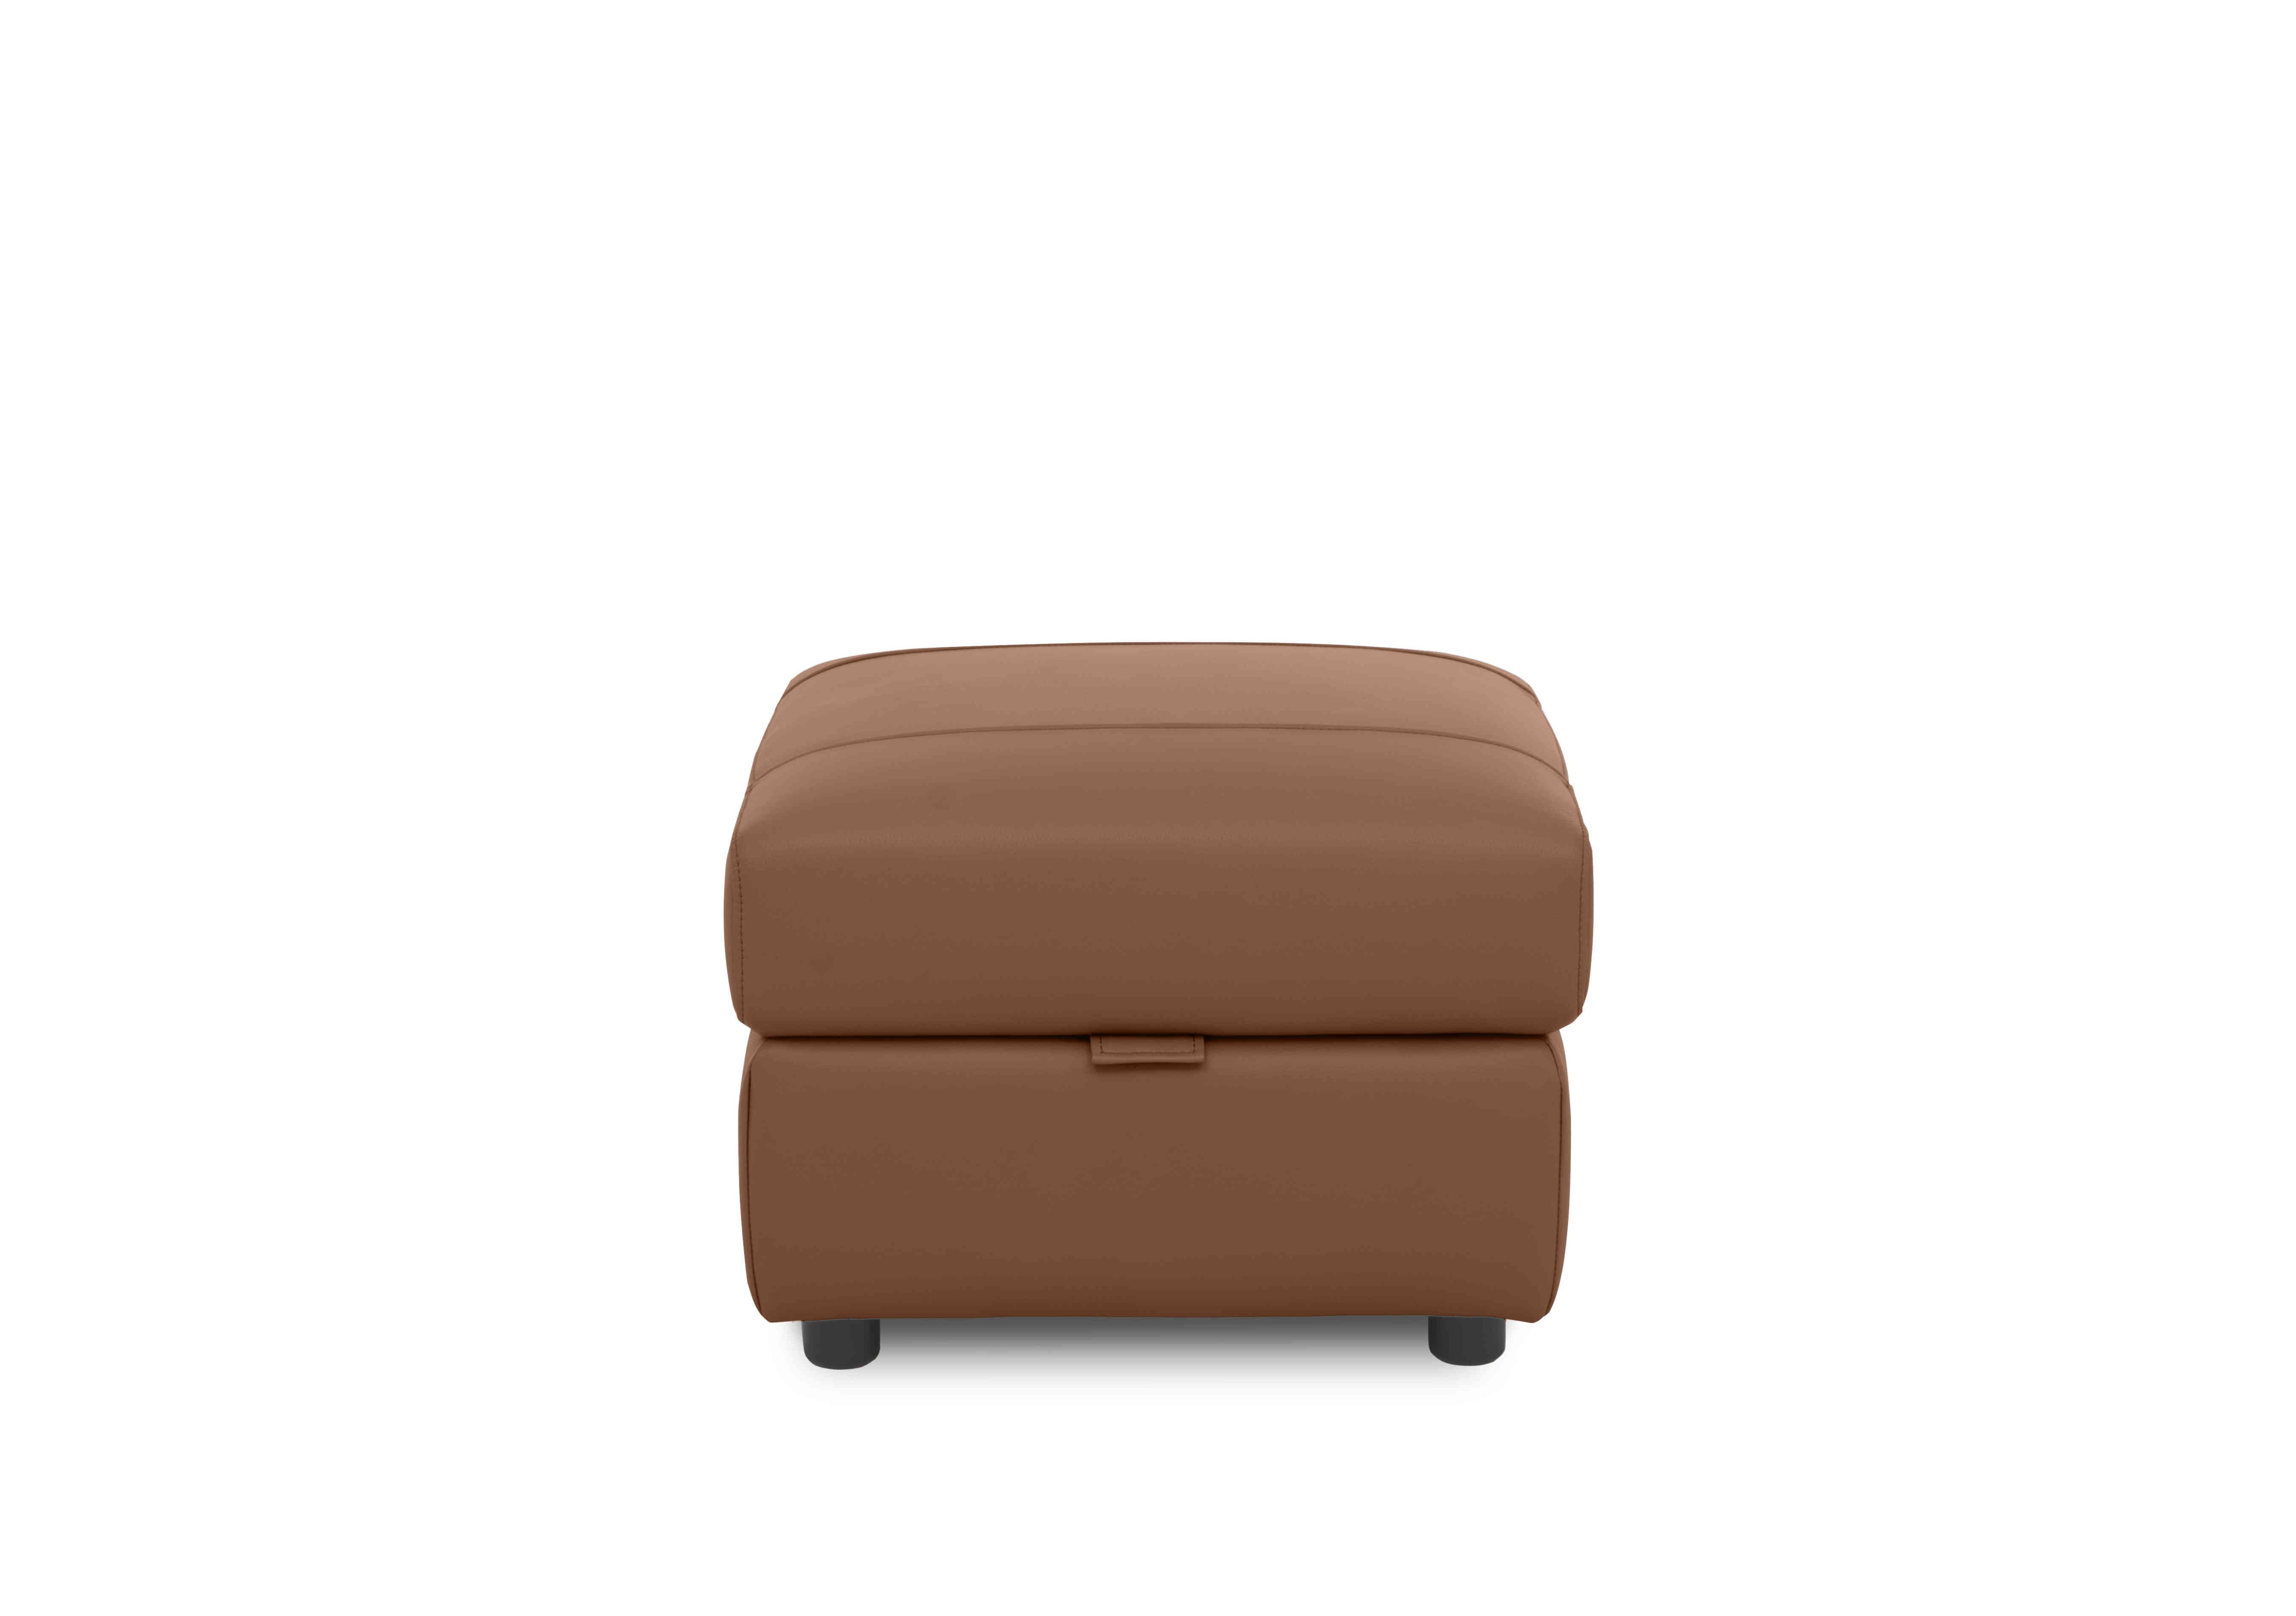 Sloane Leather Storage Footstool in Cat-60/07 Butterscotch on Furniture Village